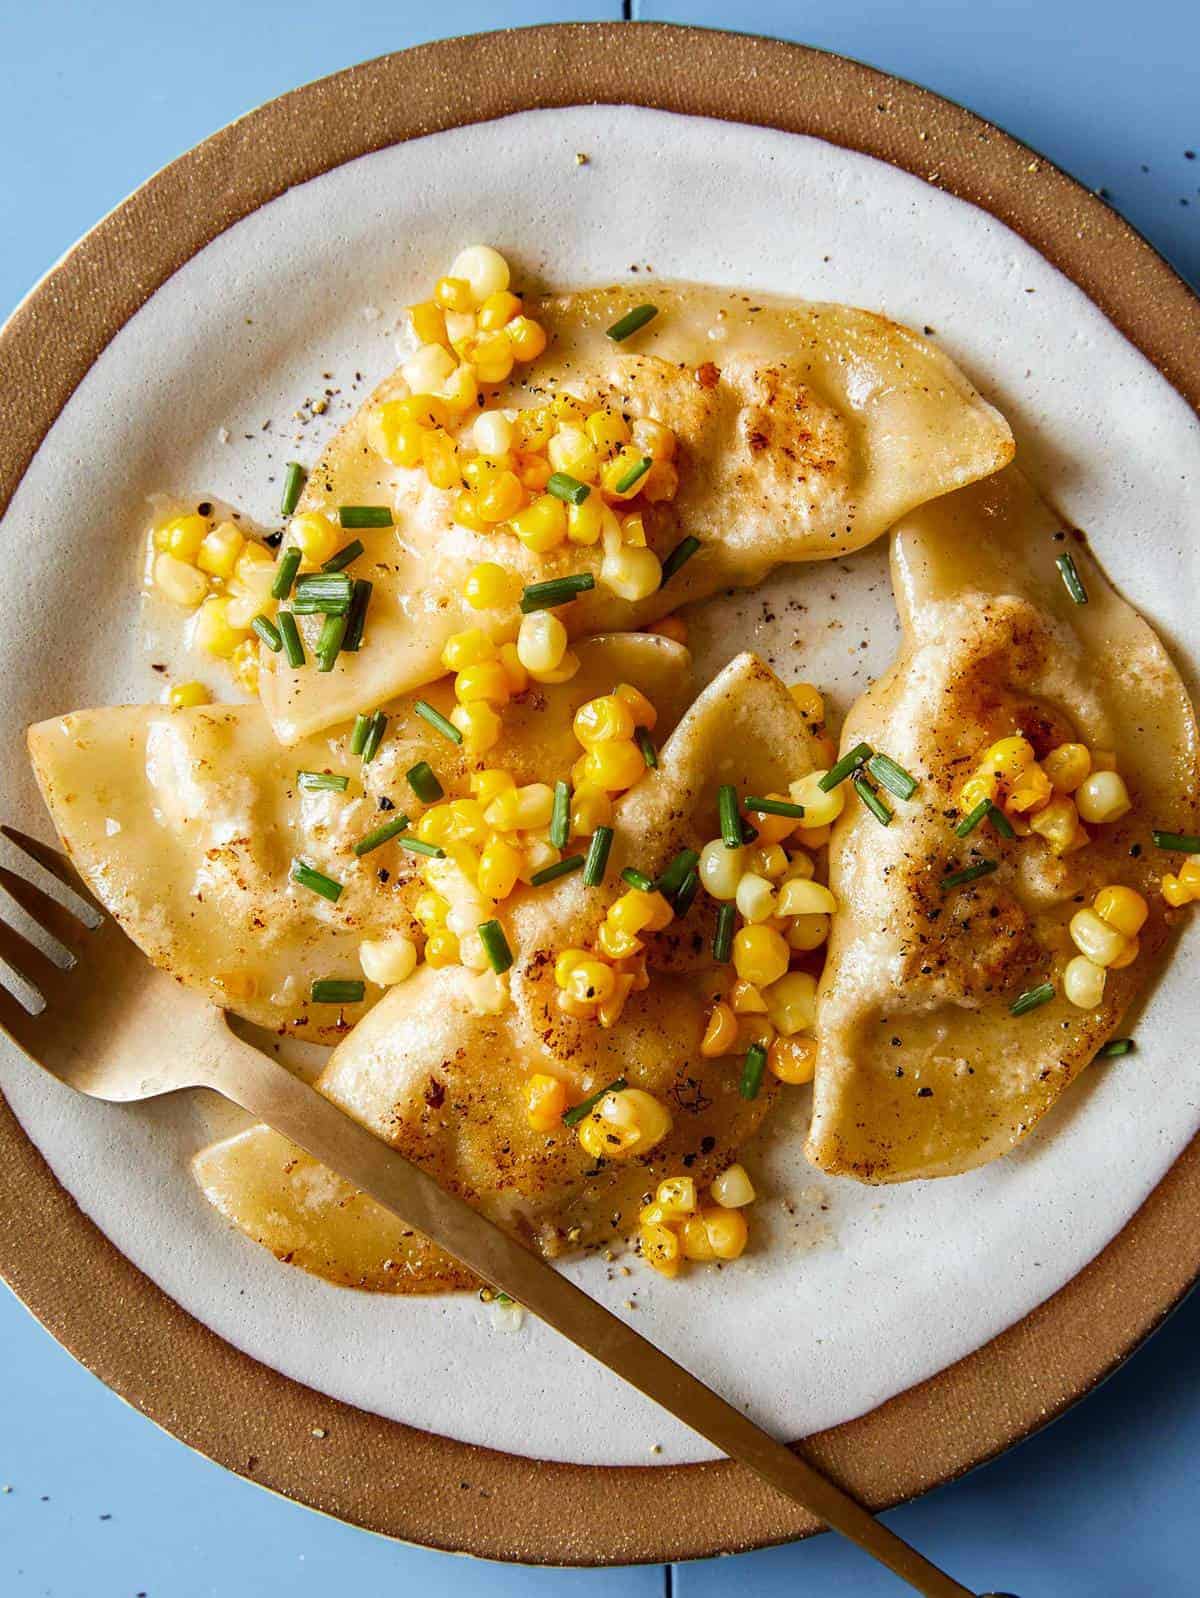 Creamy shrimp and corn ravioli on a plate with a fork.